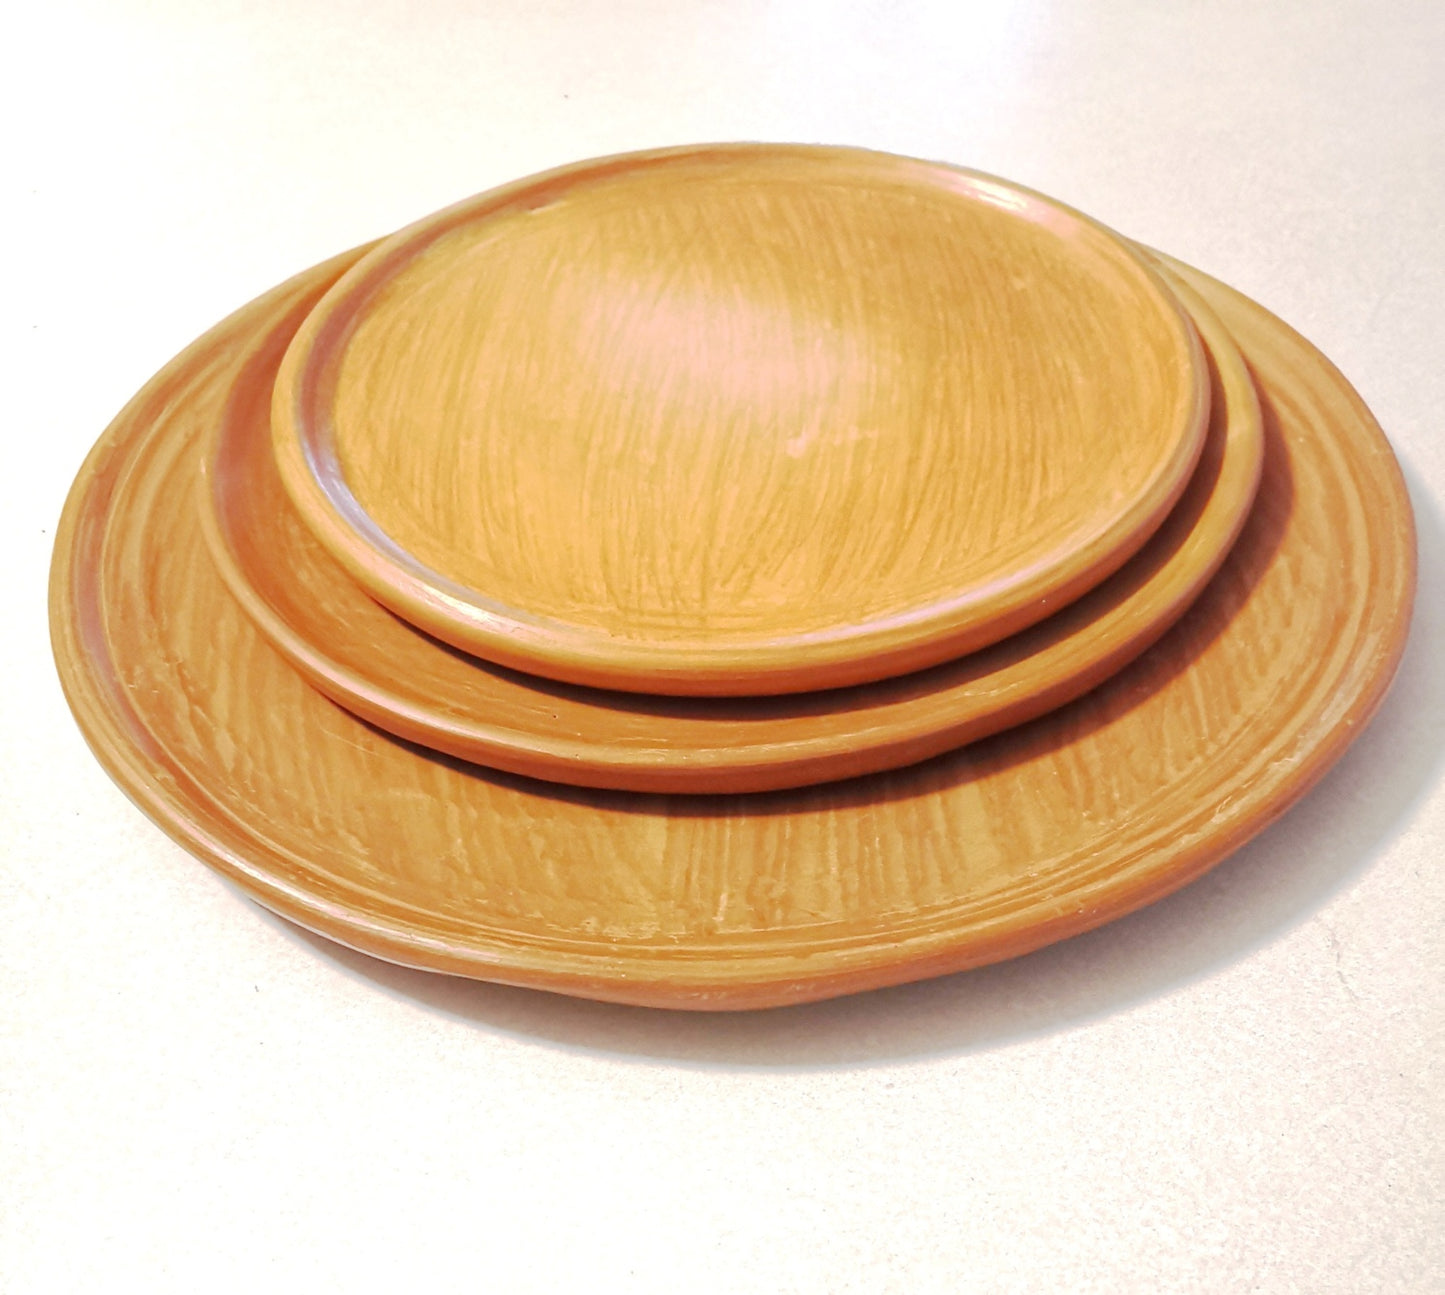 Terracotta Plates  - in sets of 4 per size